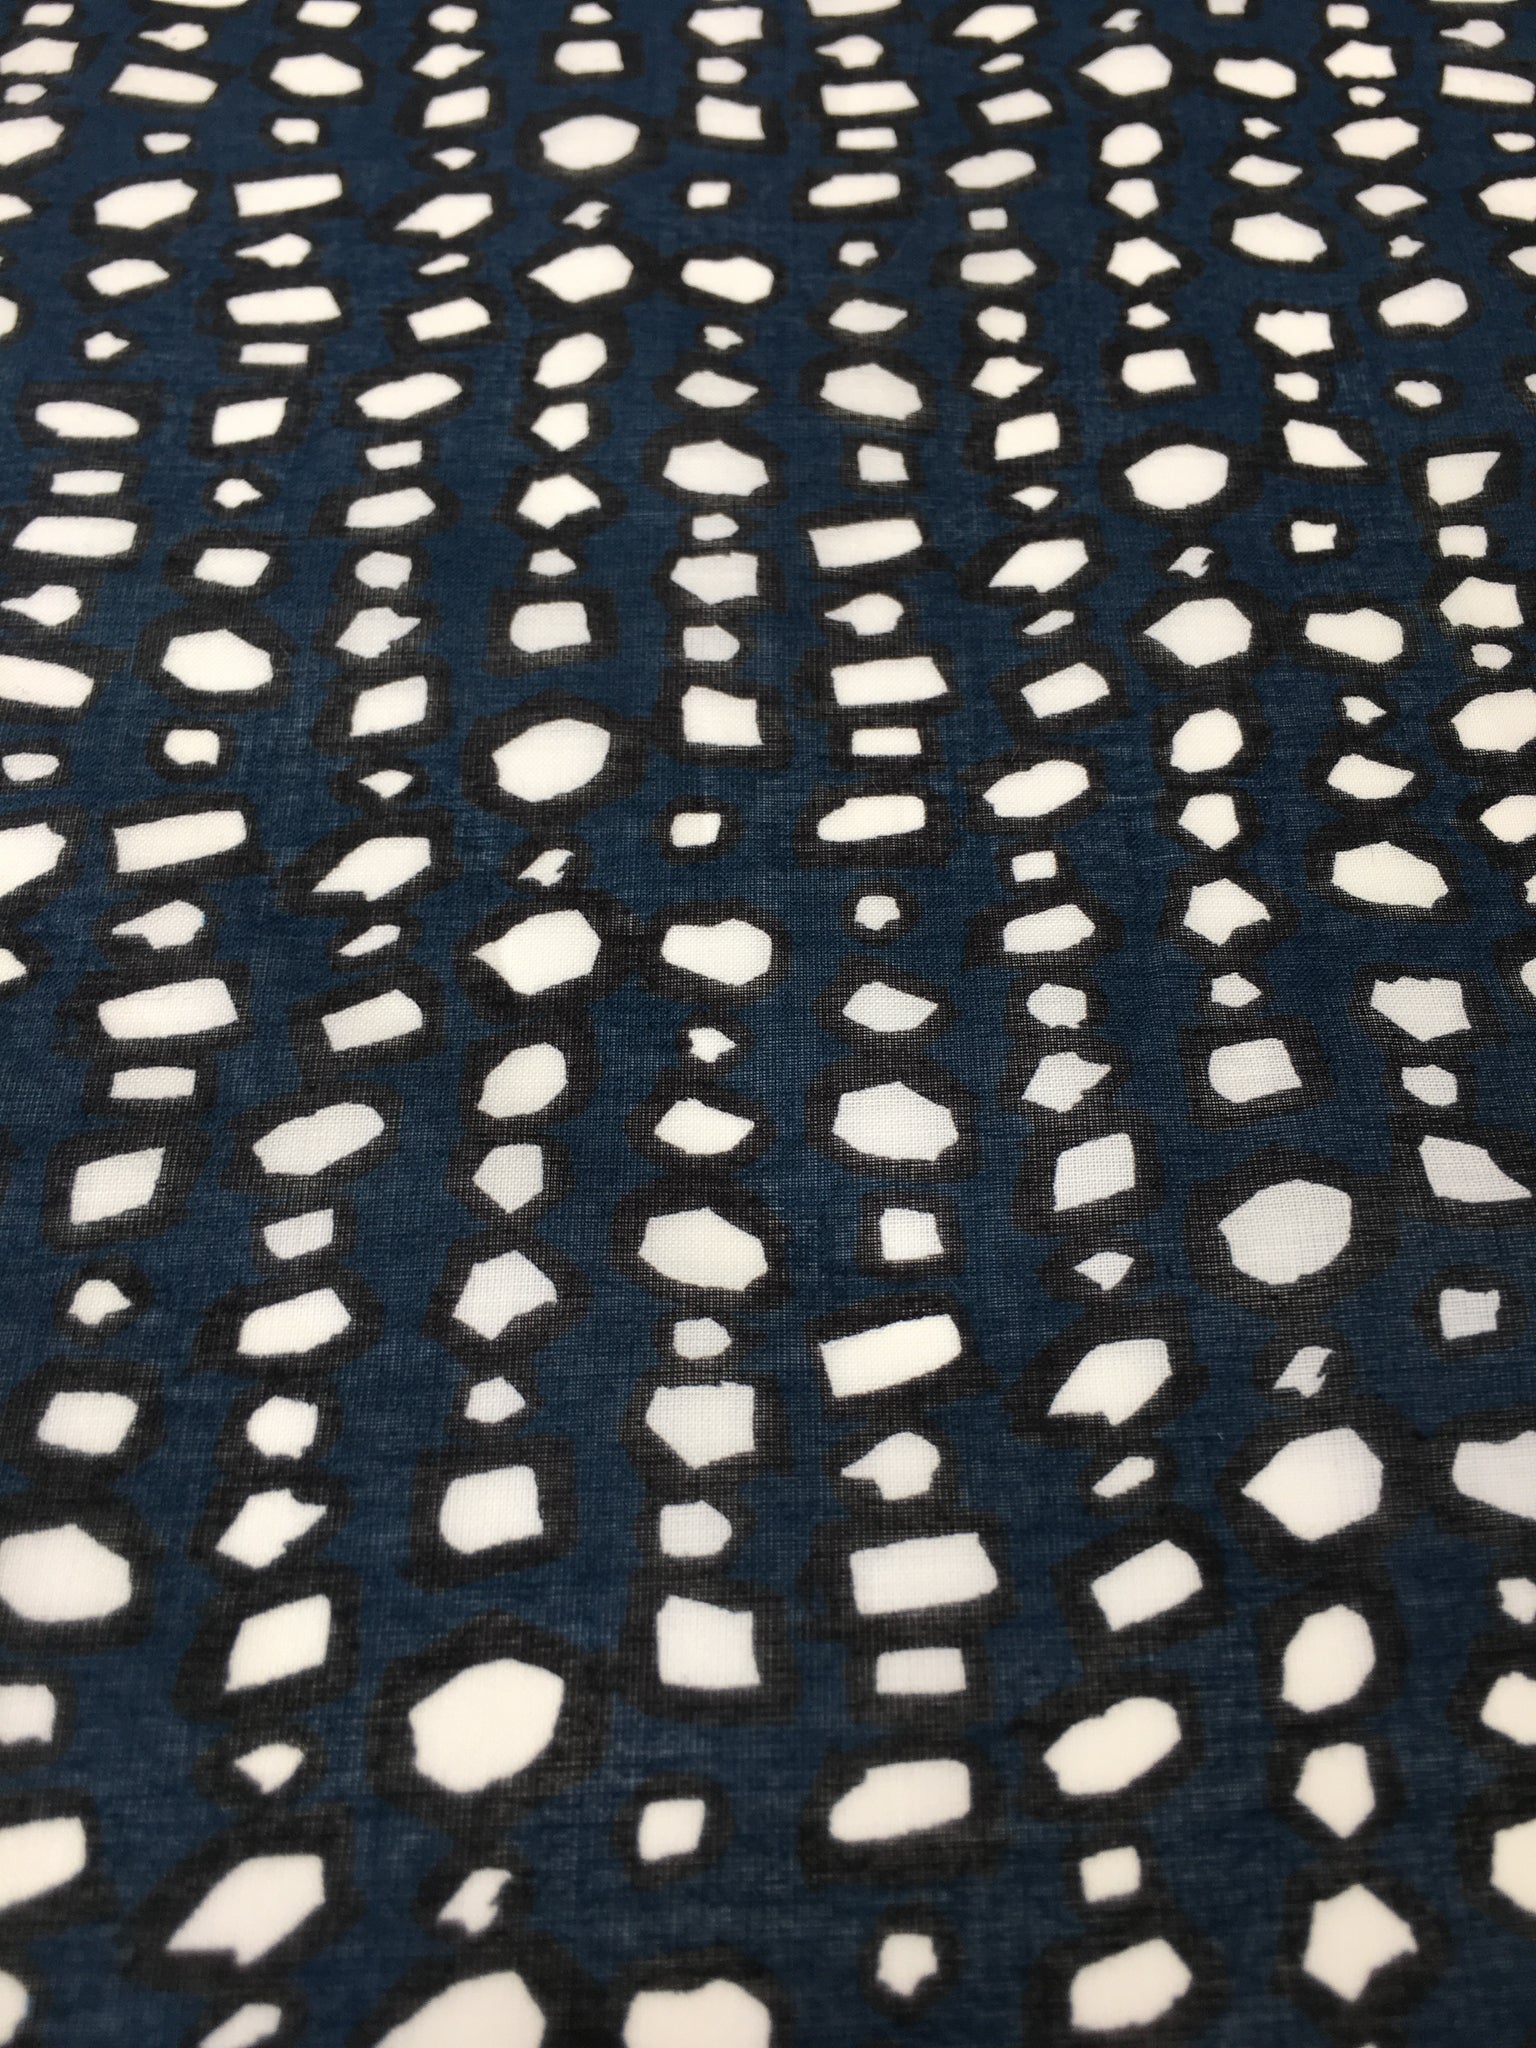 No. 1029 cotton voile with polka dots